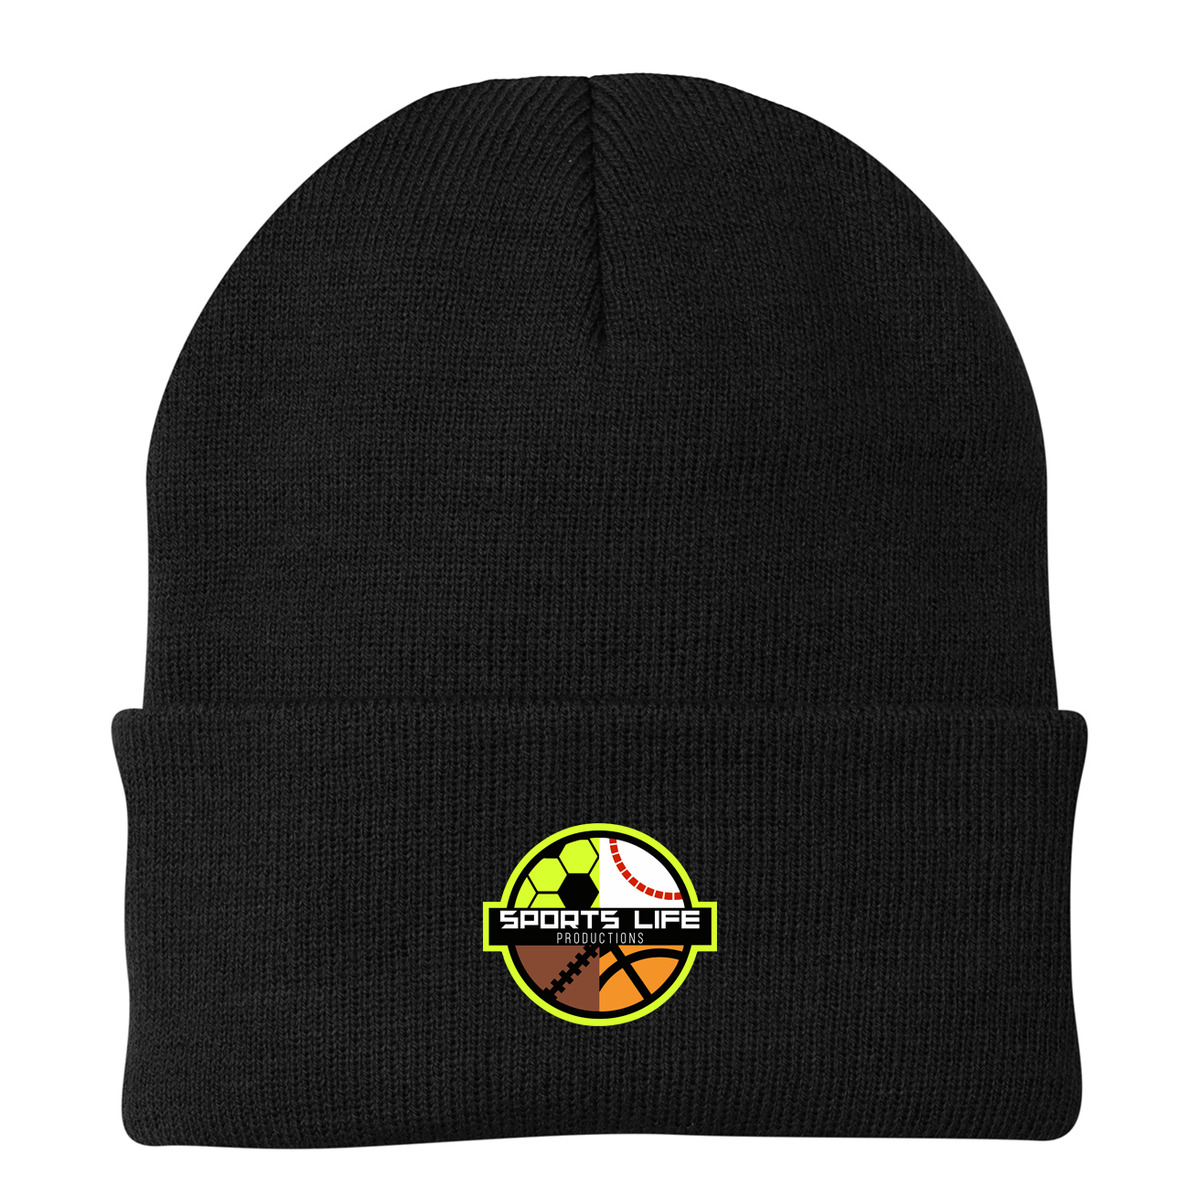 Sports Life Productions Knit Beanie